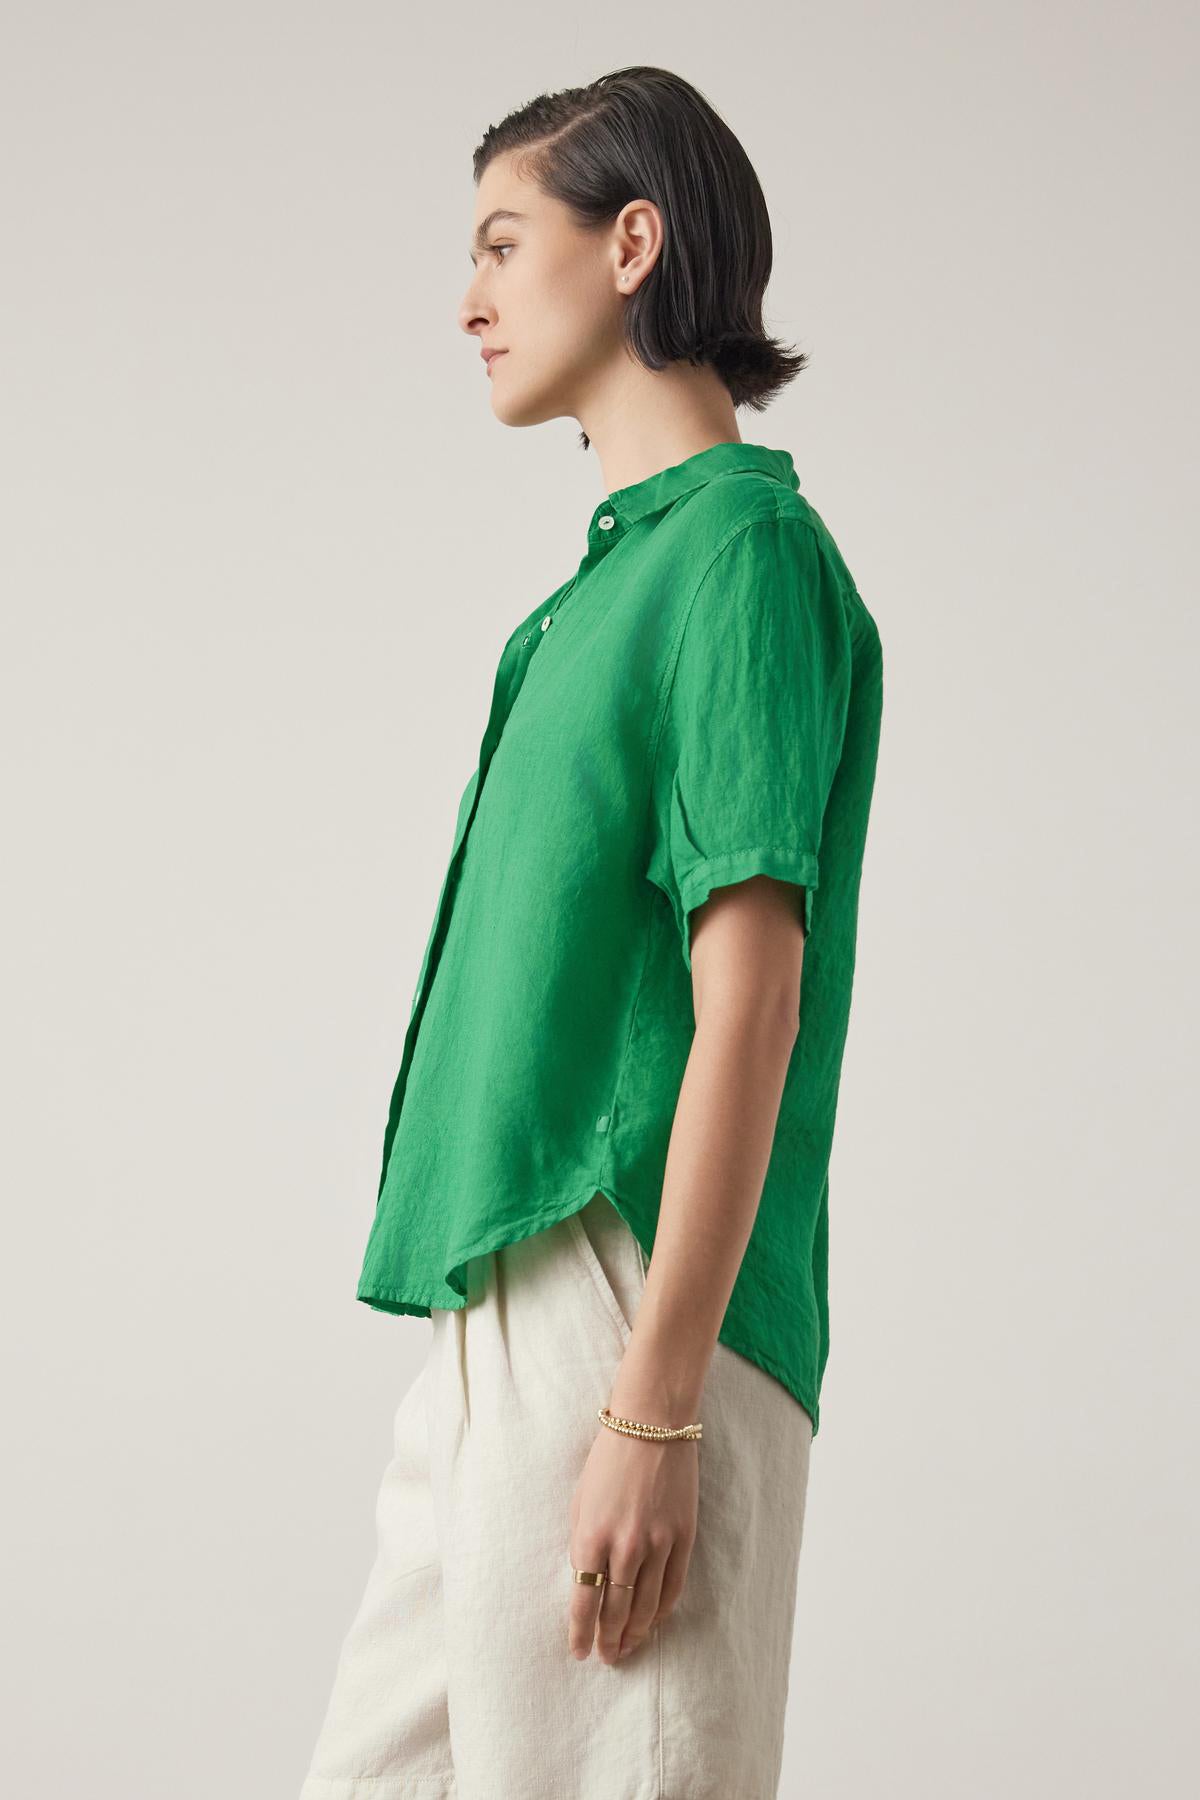   A person wearing a bright green short-sleeved Velvet by Jenny Graham Claremont linen shirt and cream pants, standing in profile against a neutral background. 